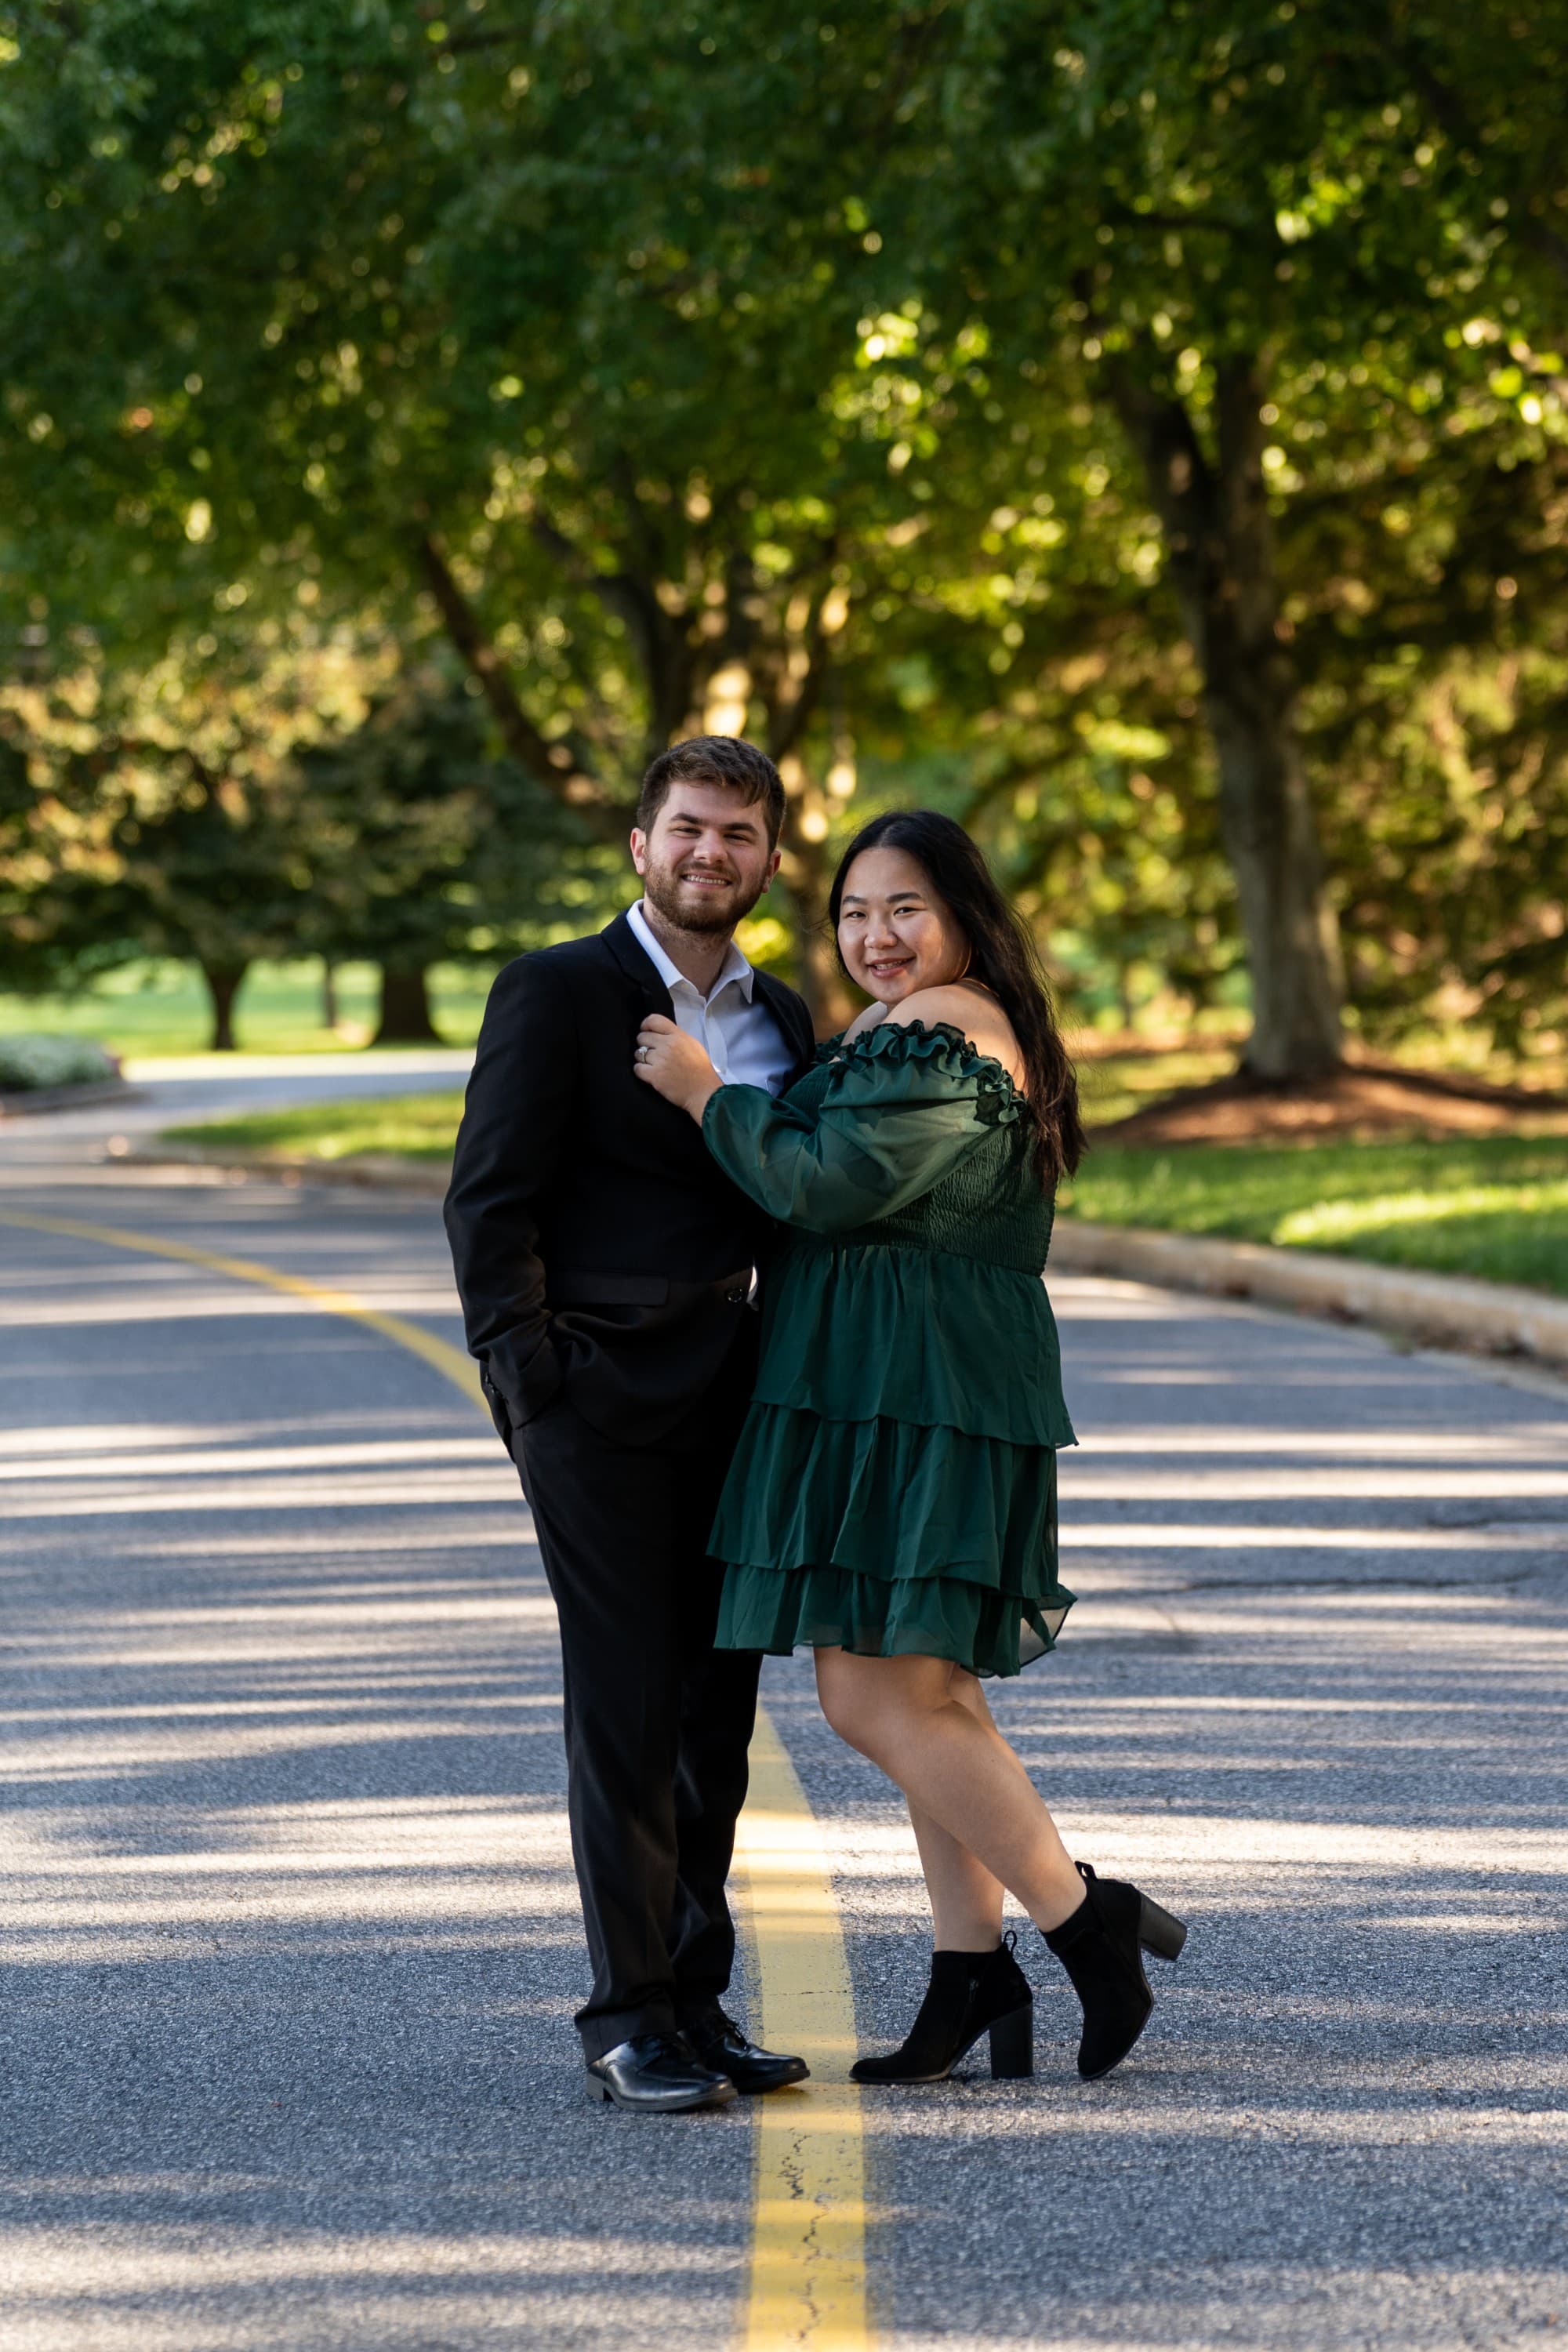 Yina & Norman | Engagement Session at Stevenson University in Owings Mills, MD